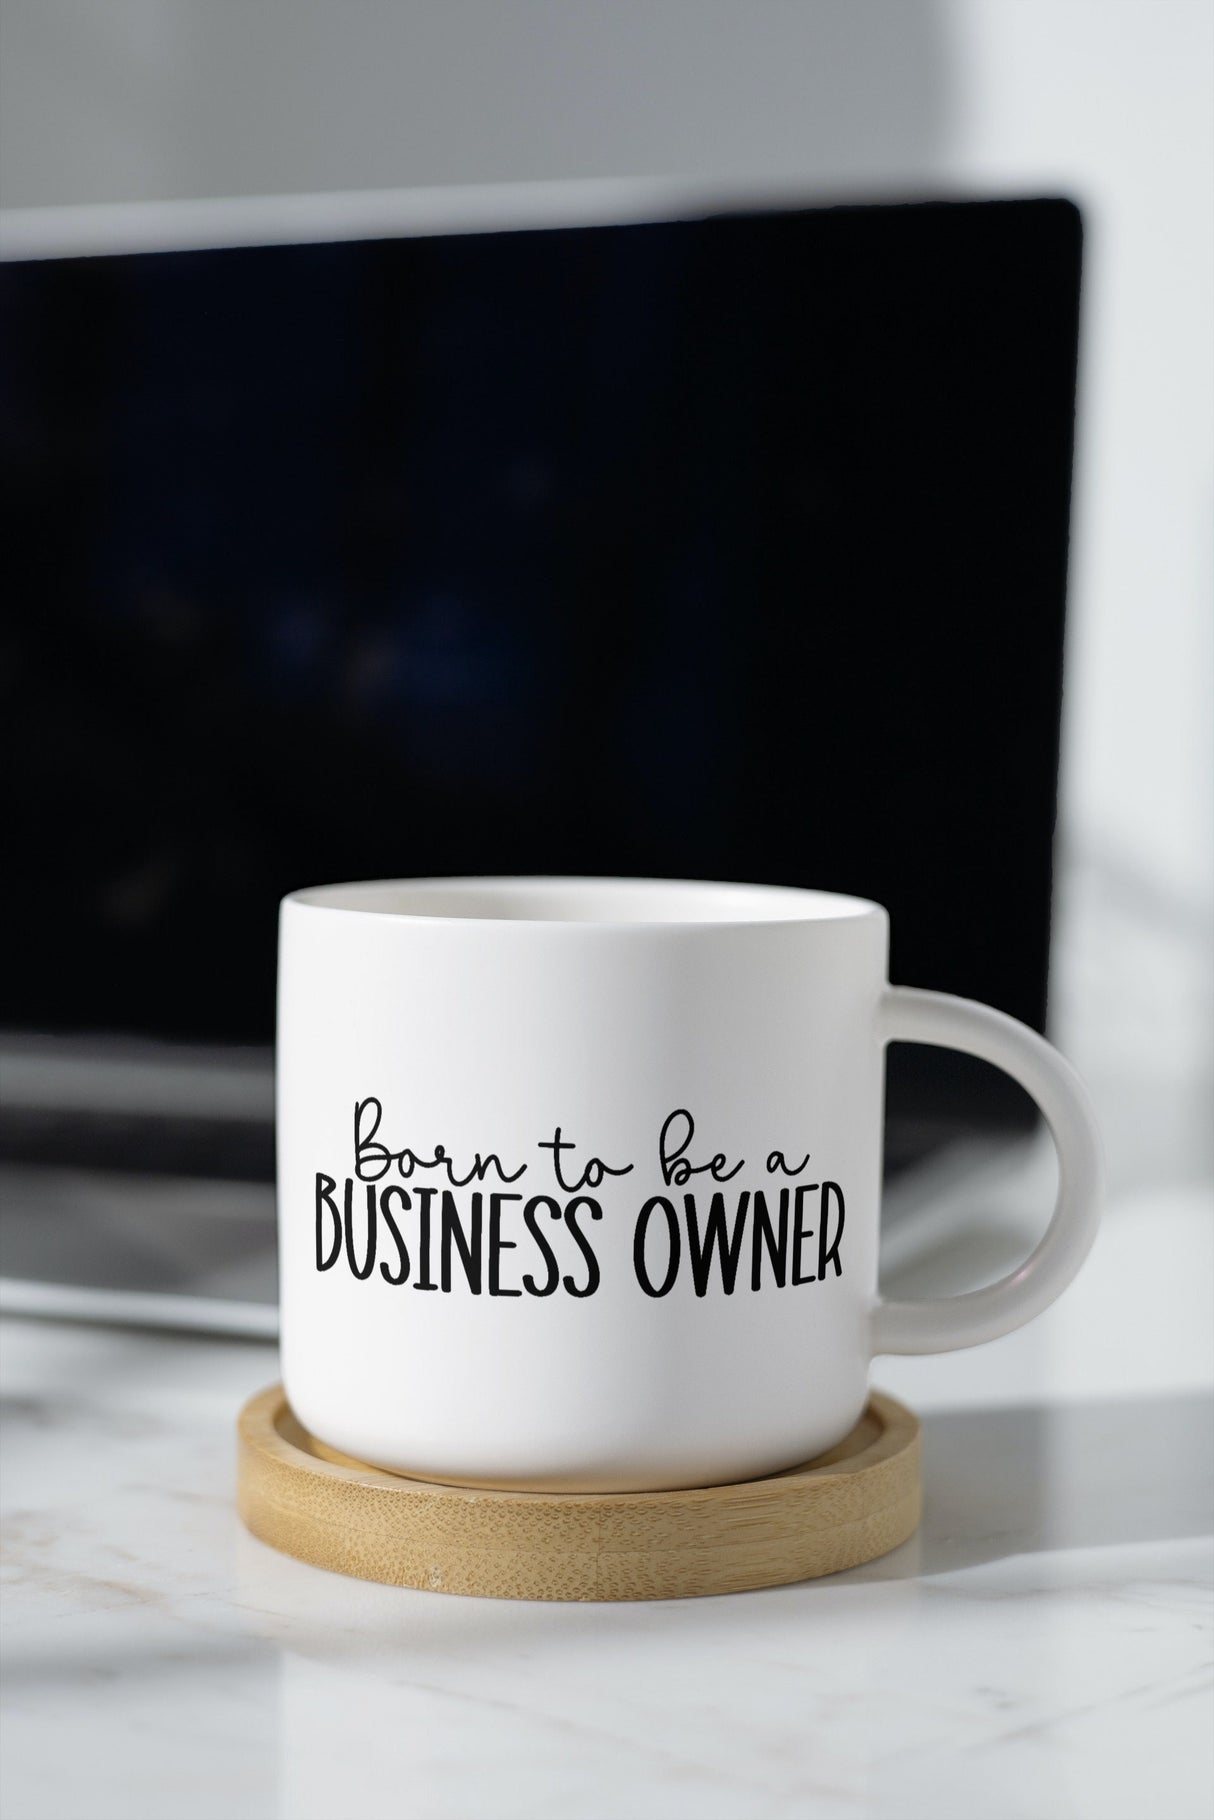 Born To Be A Business Owner SVG Cut File